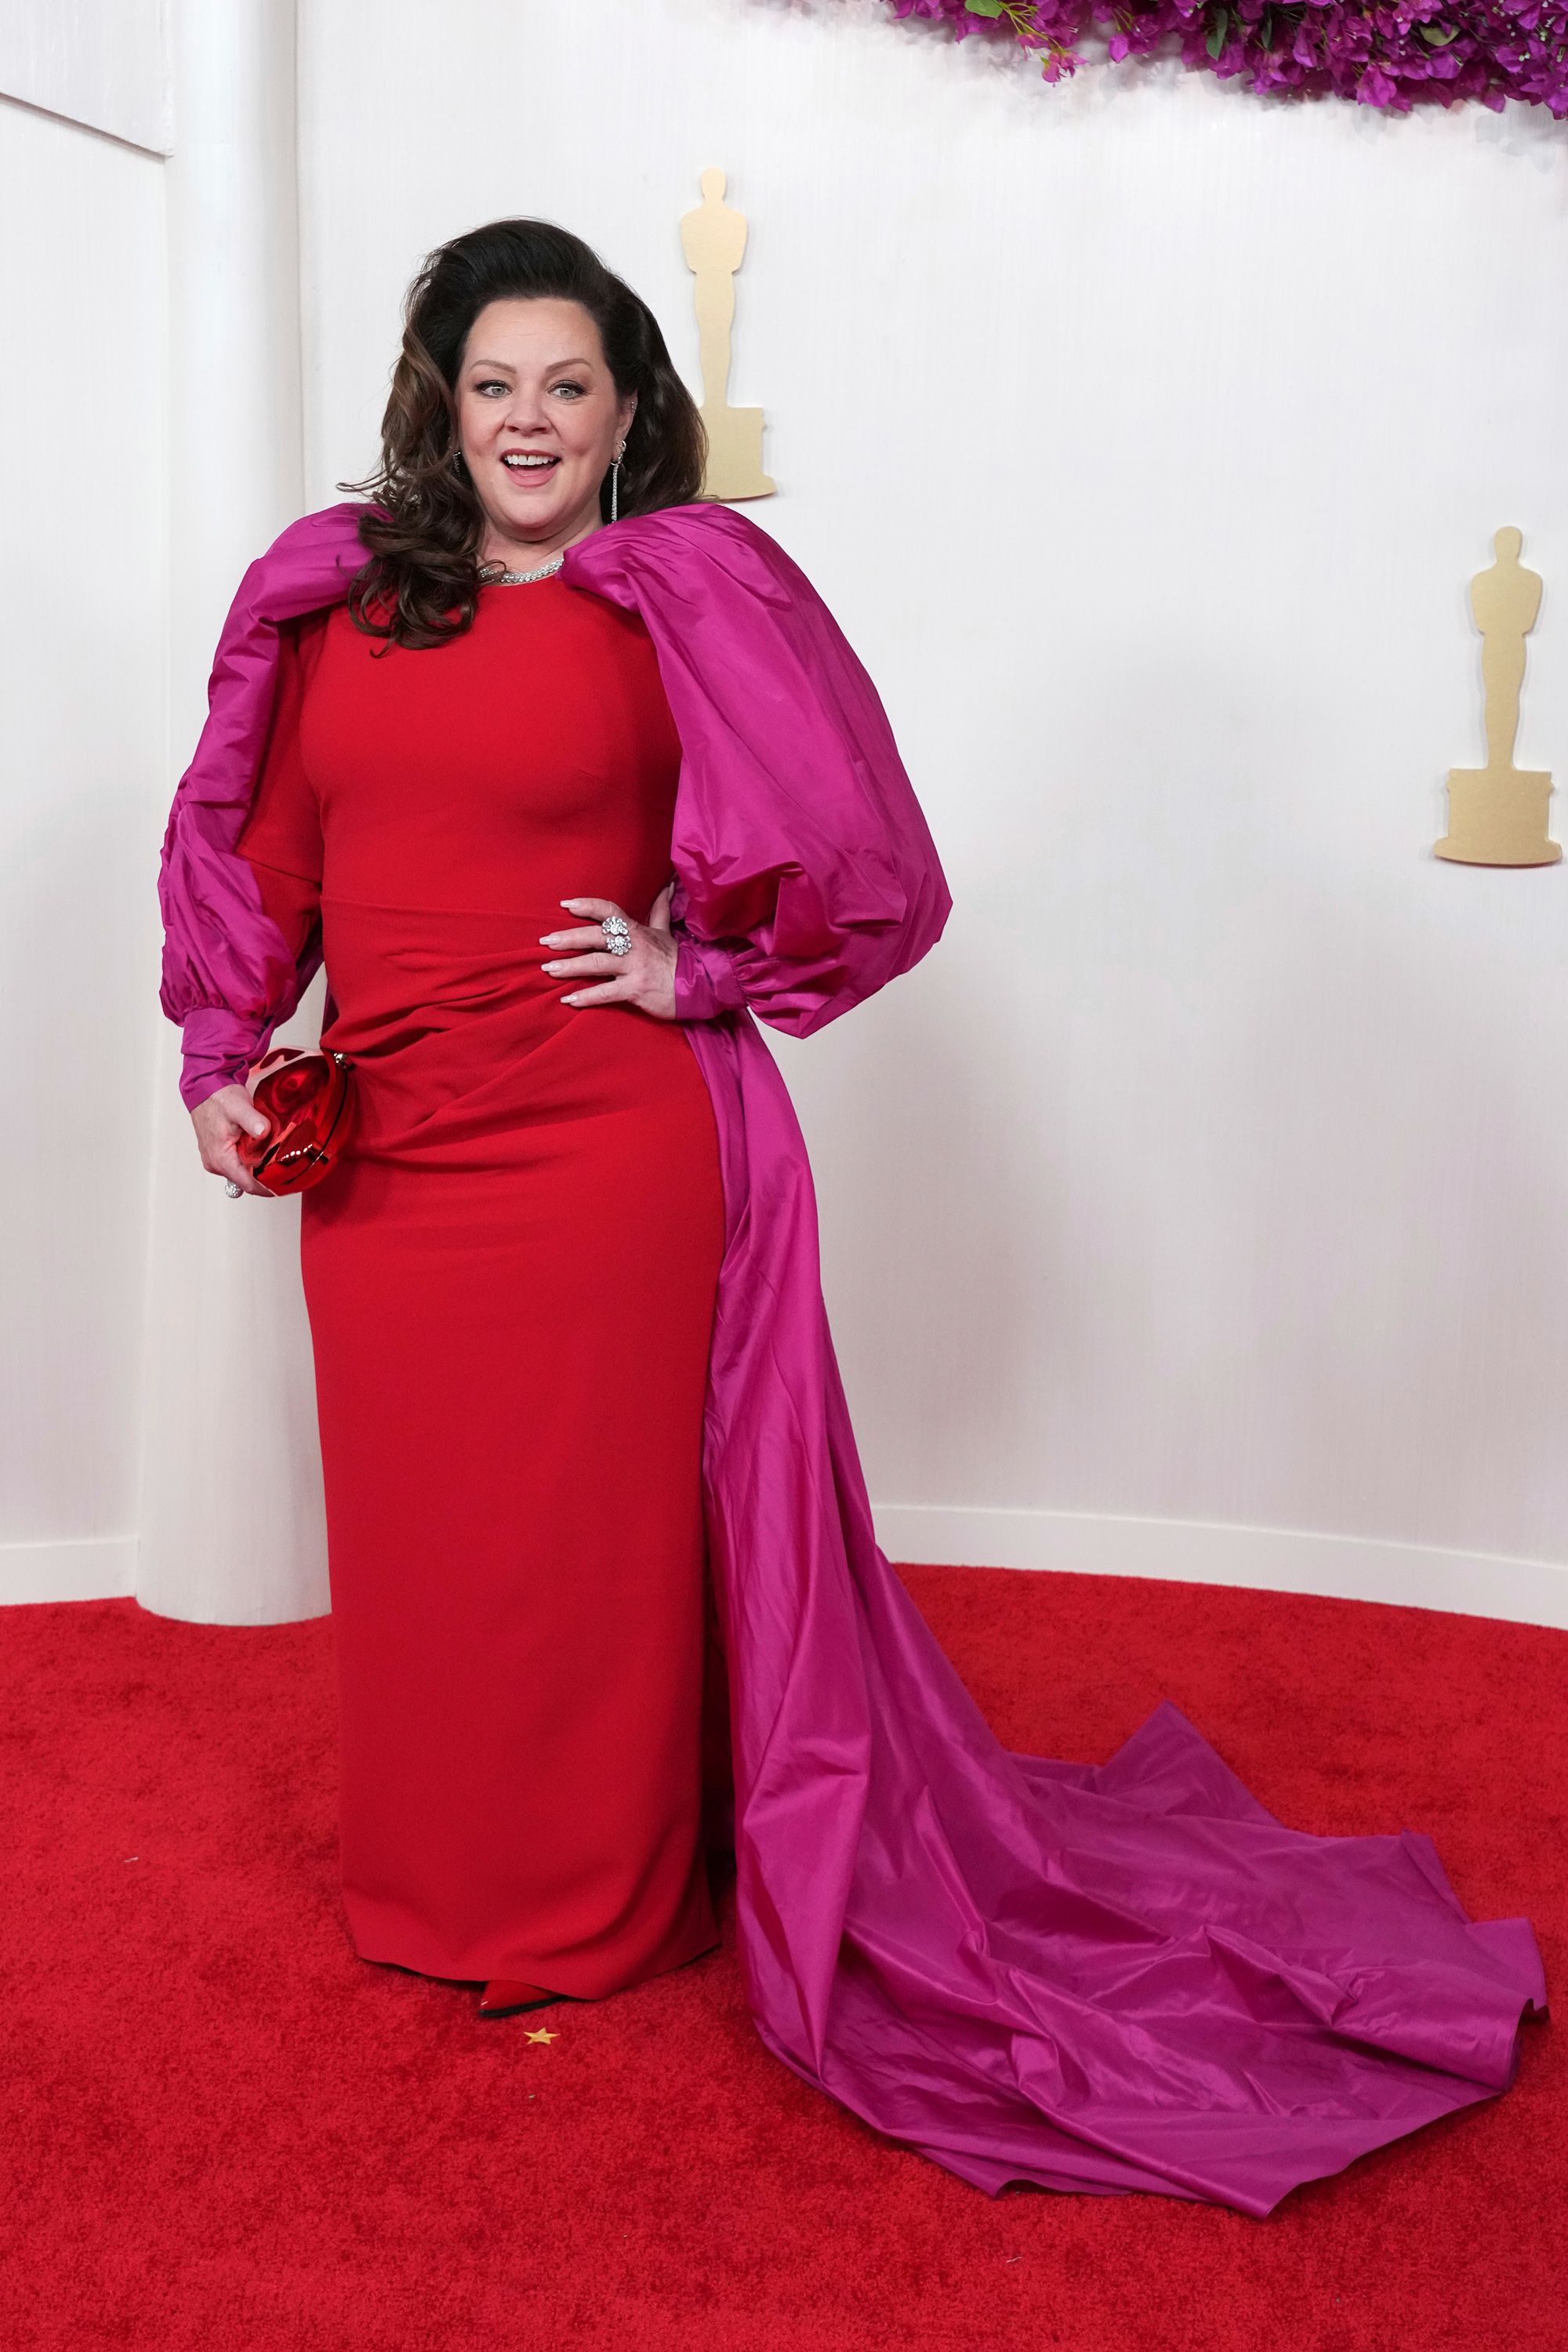 Melissa McCarthy channeled old Hollywood glamor in a red dress with magenta sleeves.  The actor accessorized with Dena Kemp jewelry.